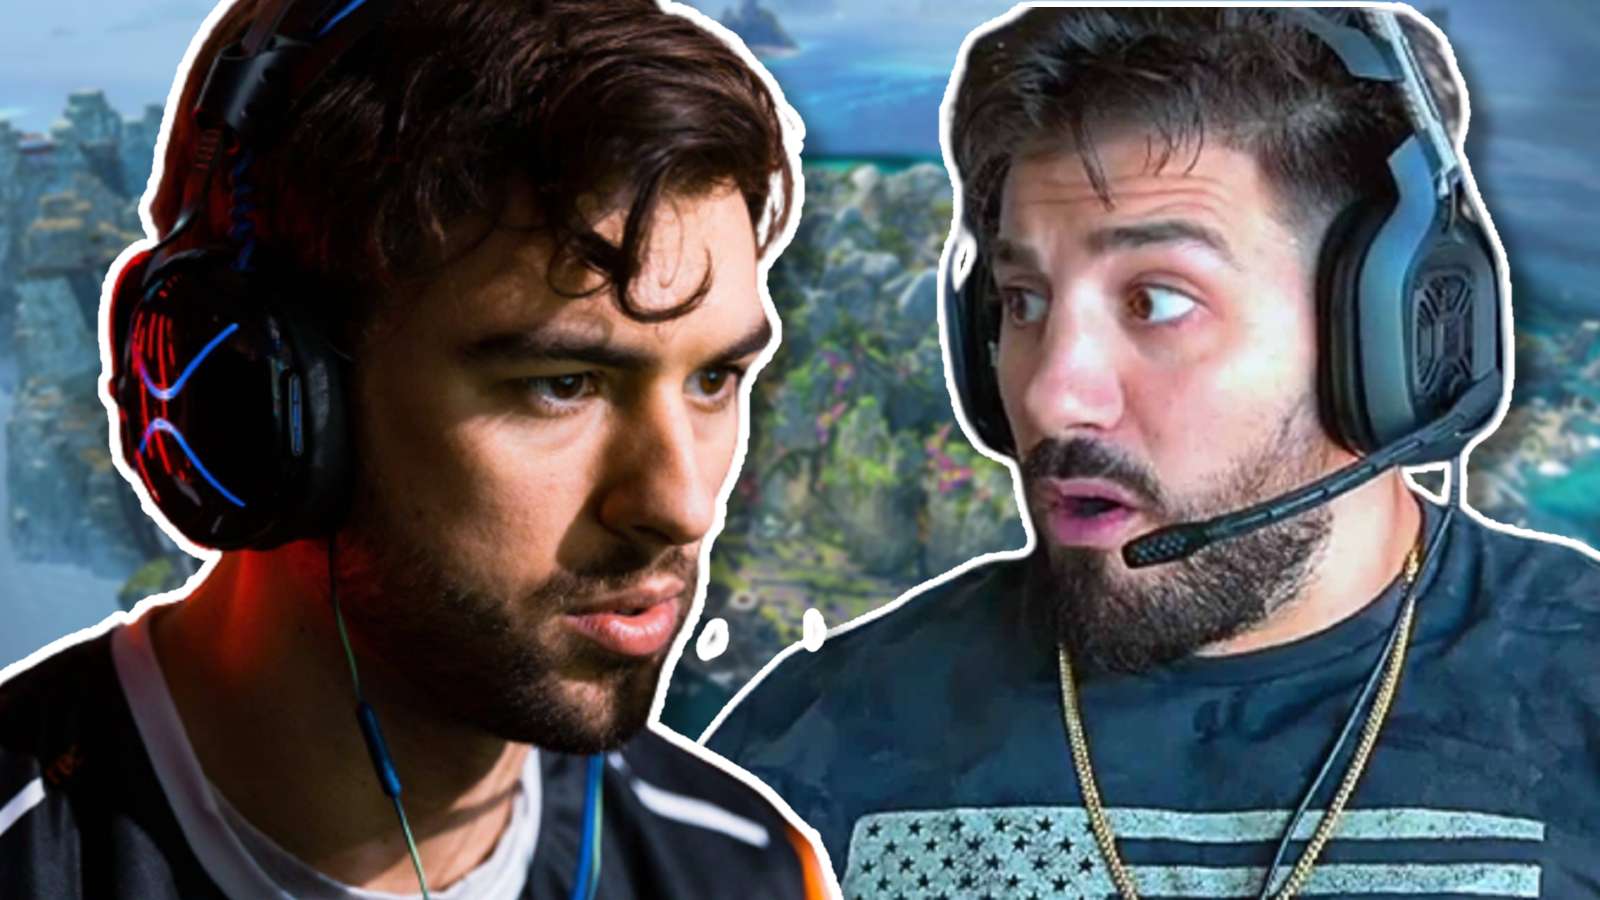 NICKMERCS and Snip3down in Apex Legends image.